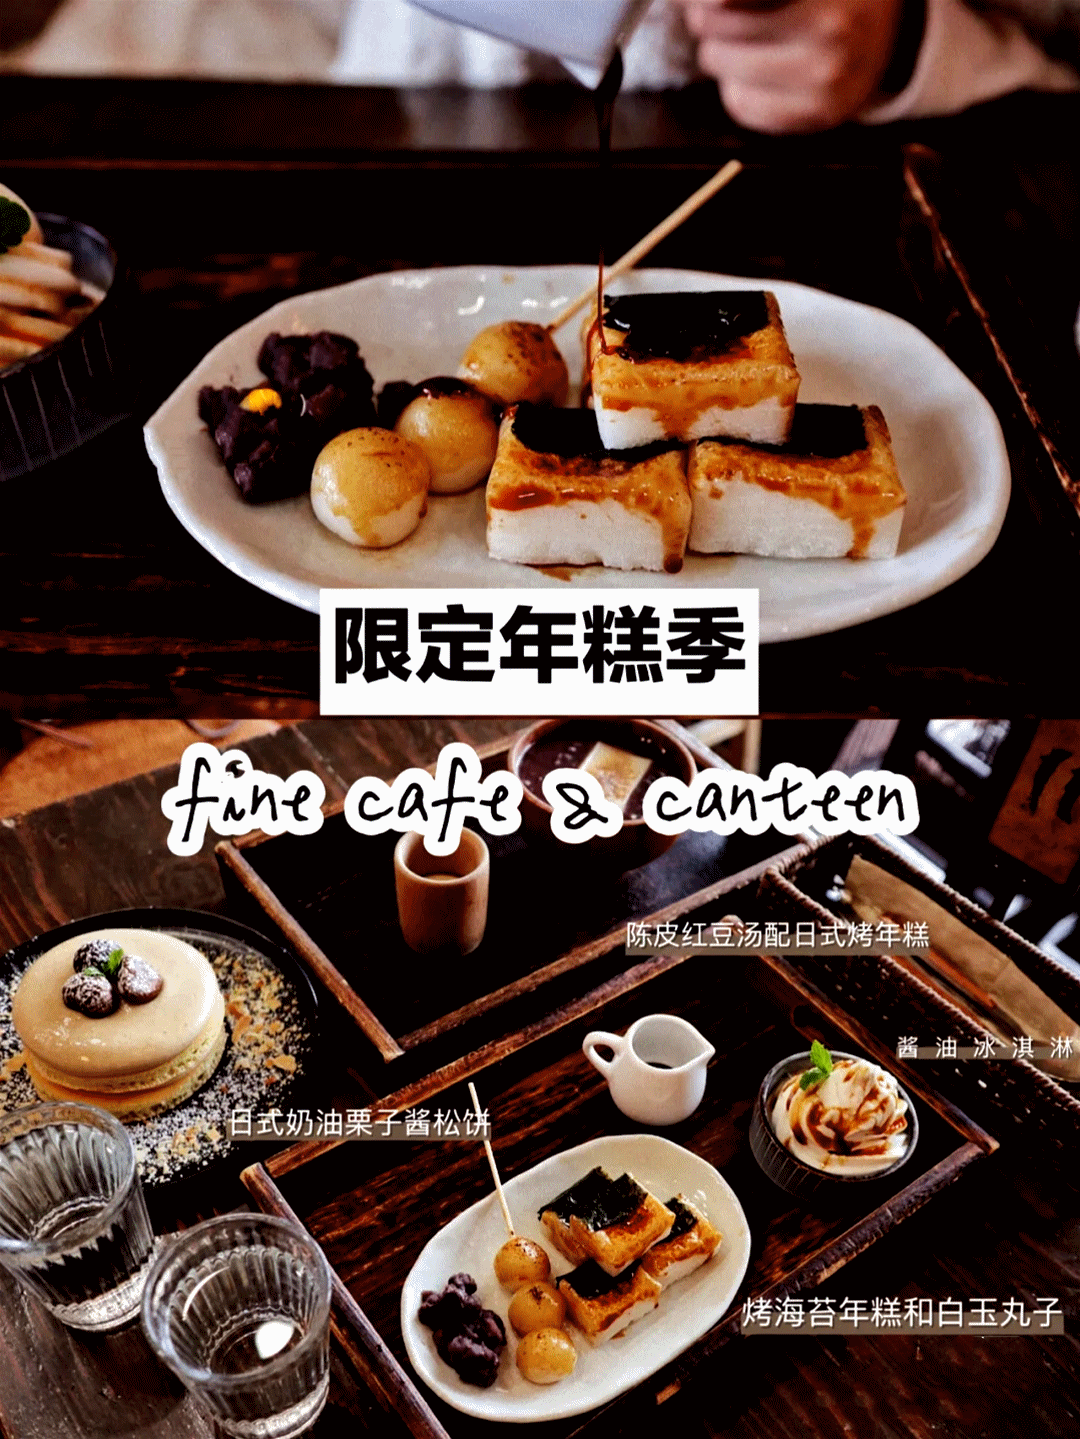 - Fine Cafe&canteen闪图